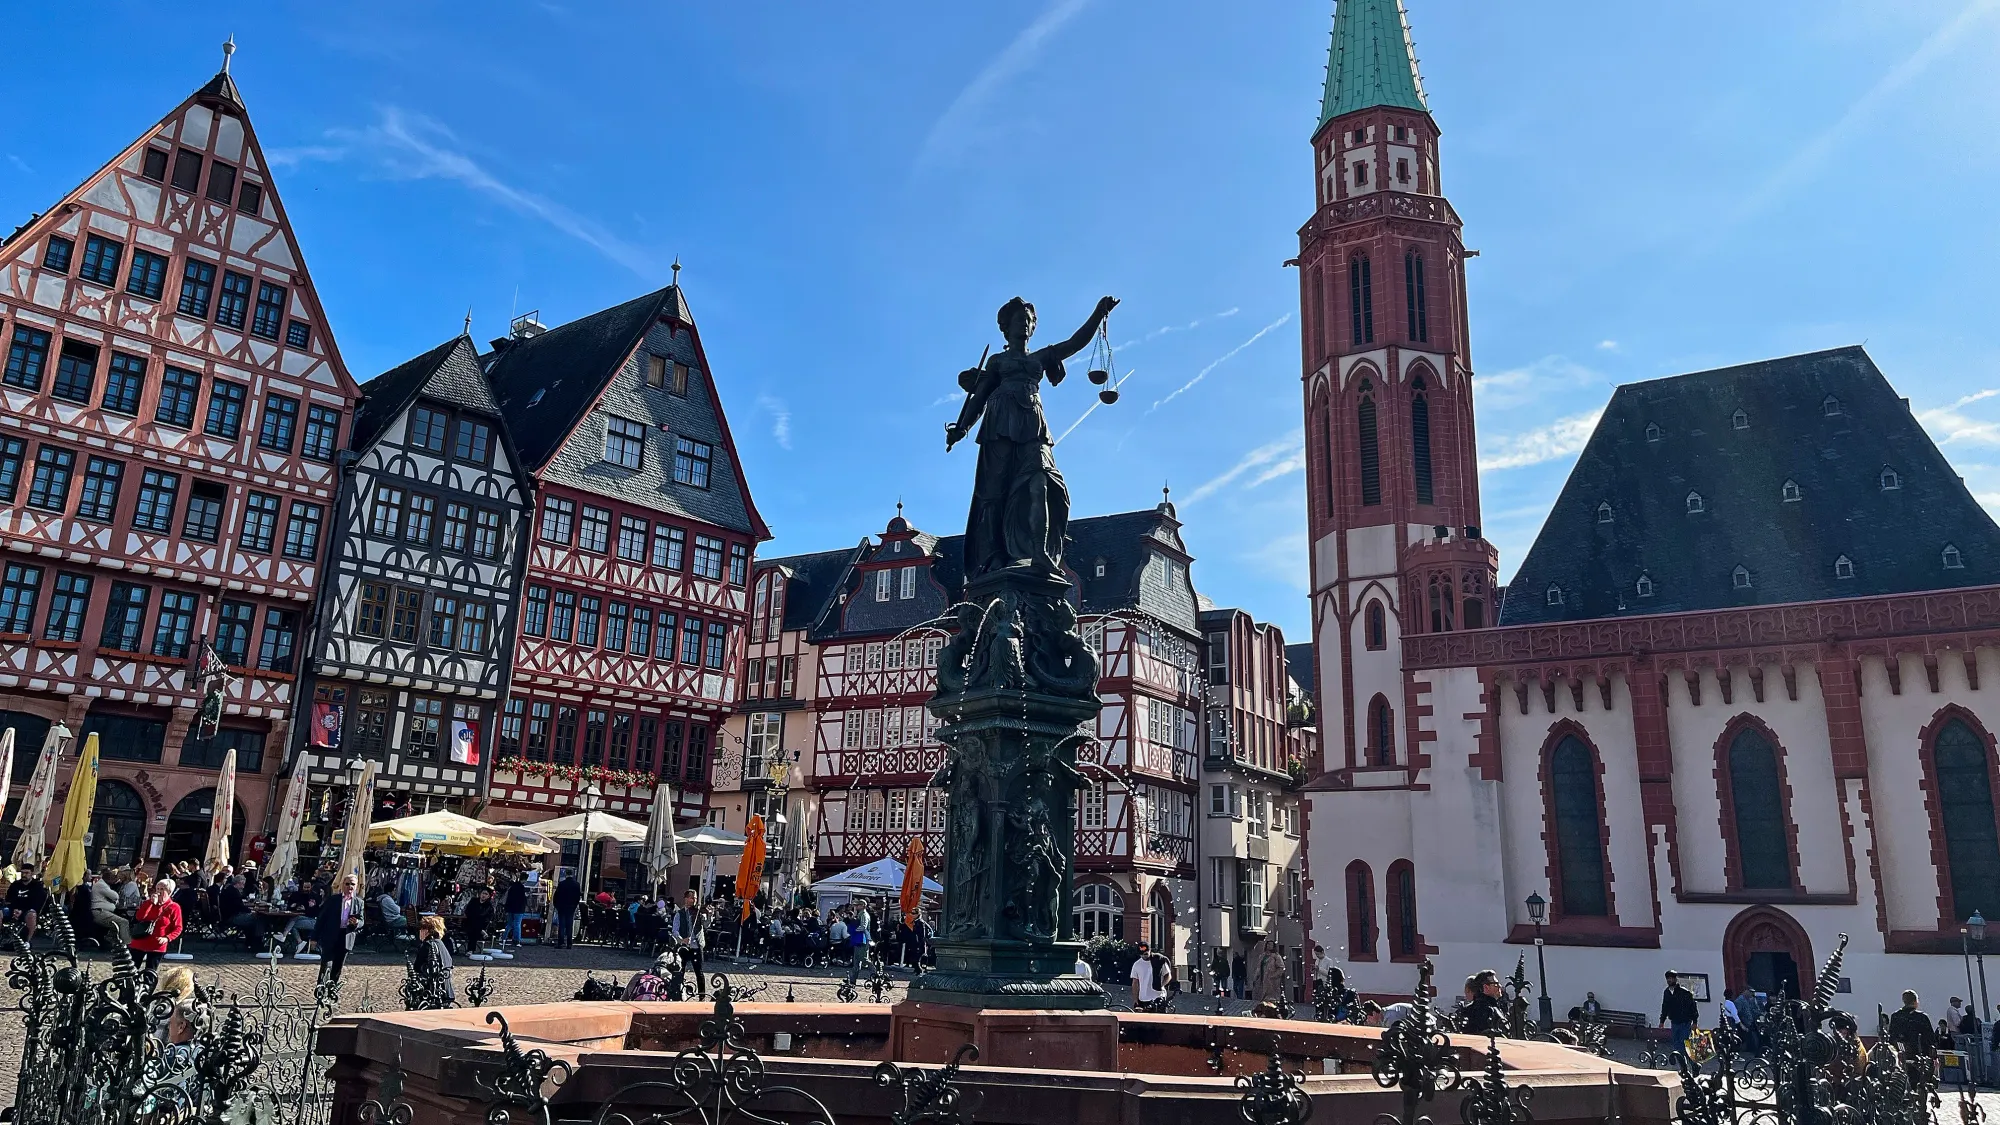 A Bavarian style plaza with a statue/fountain in the center